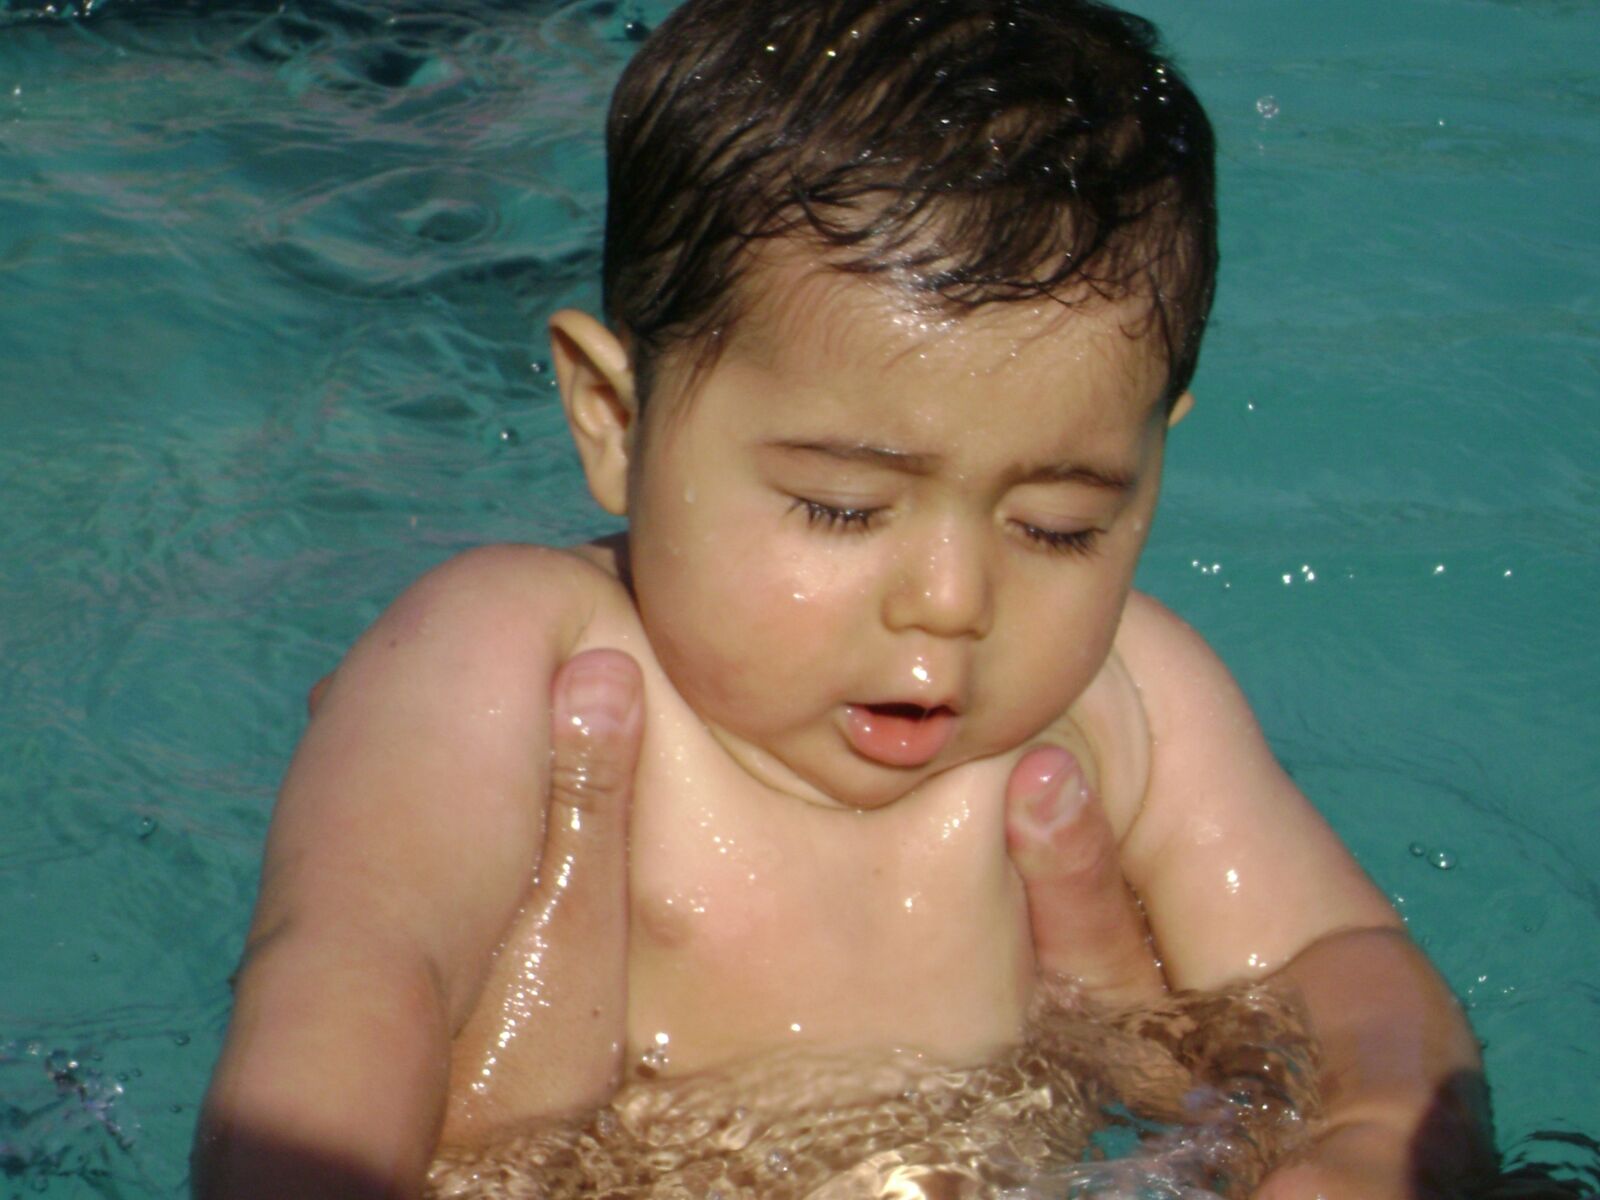 Sony DSC-S700 sample photo. Pool, child, holiday photography